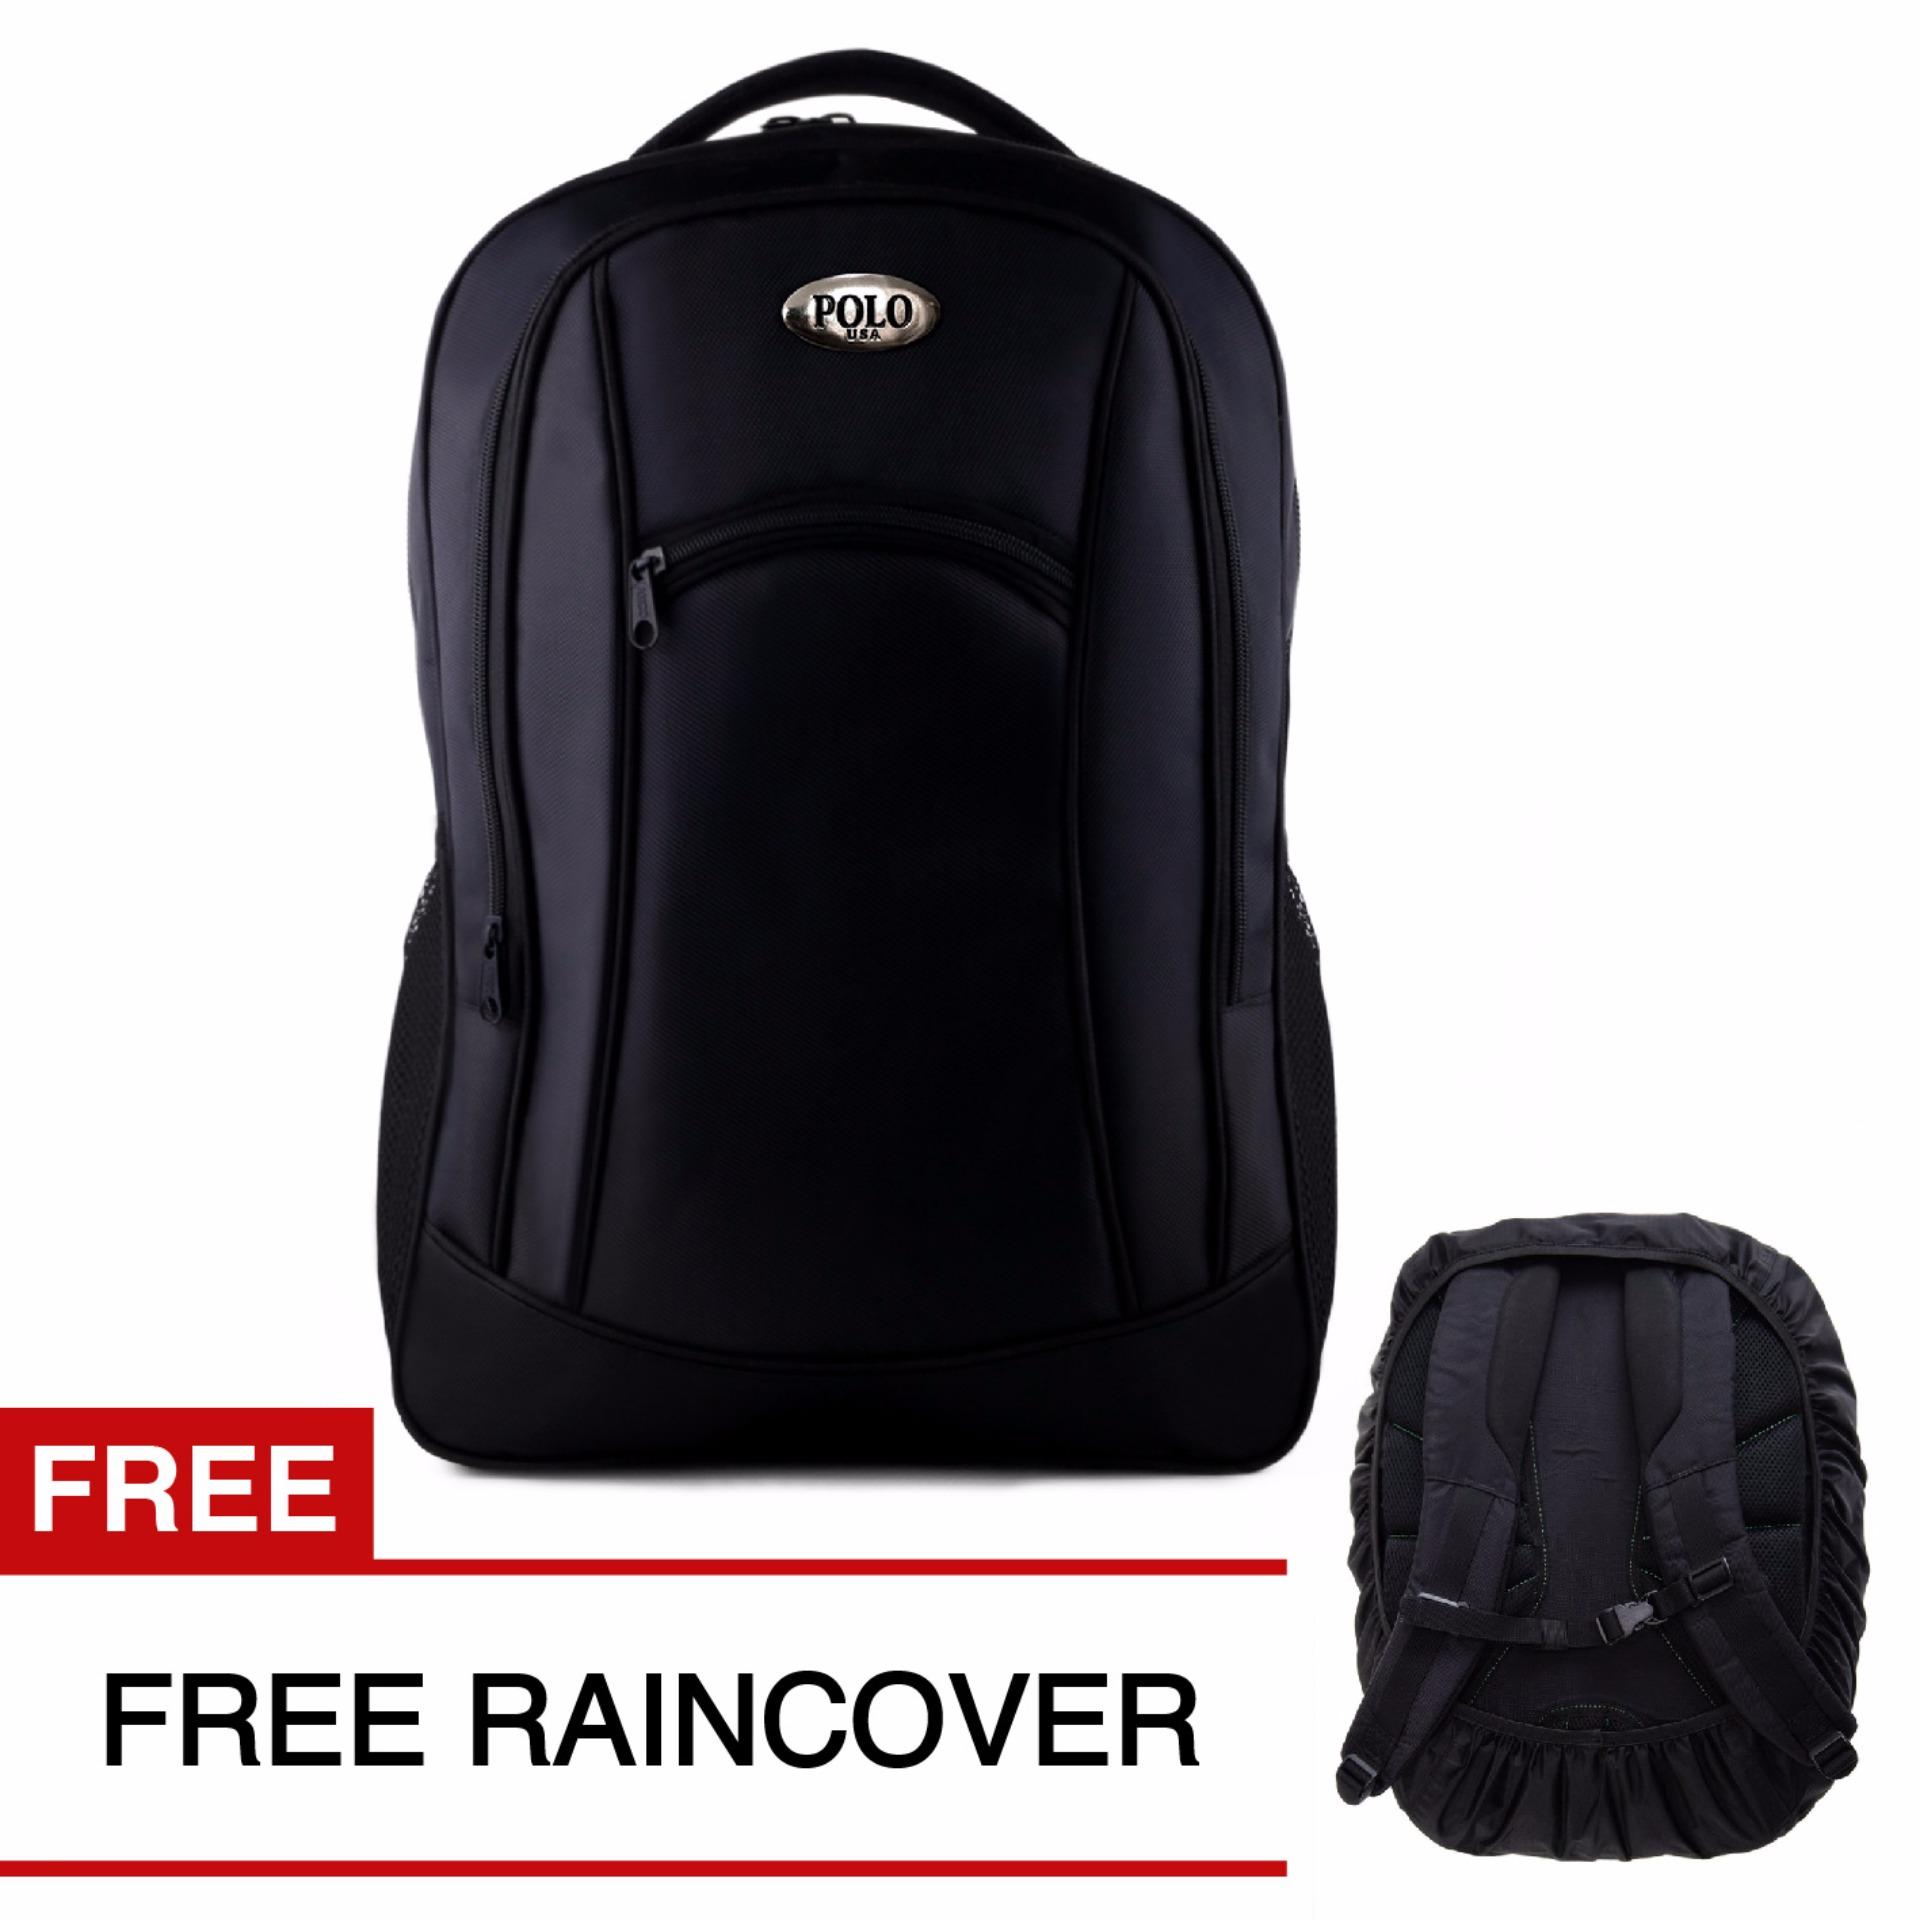 Polo Campus BLACK BOMBER Laptop Backpack + FREE Raincover 111